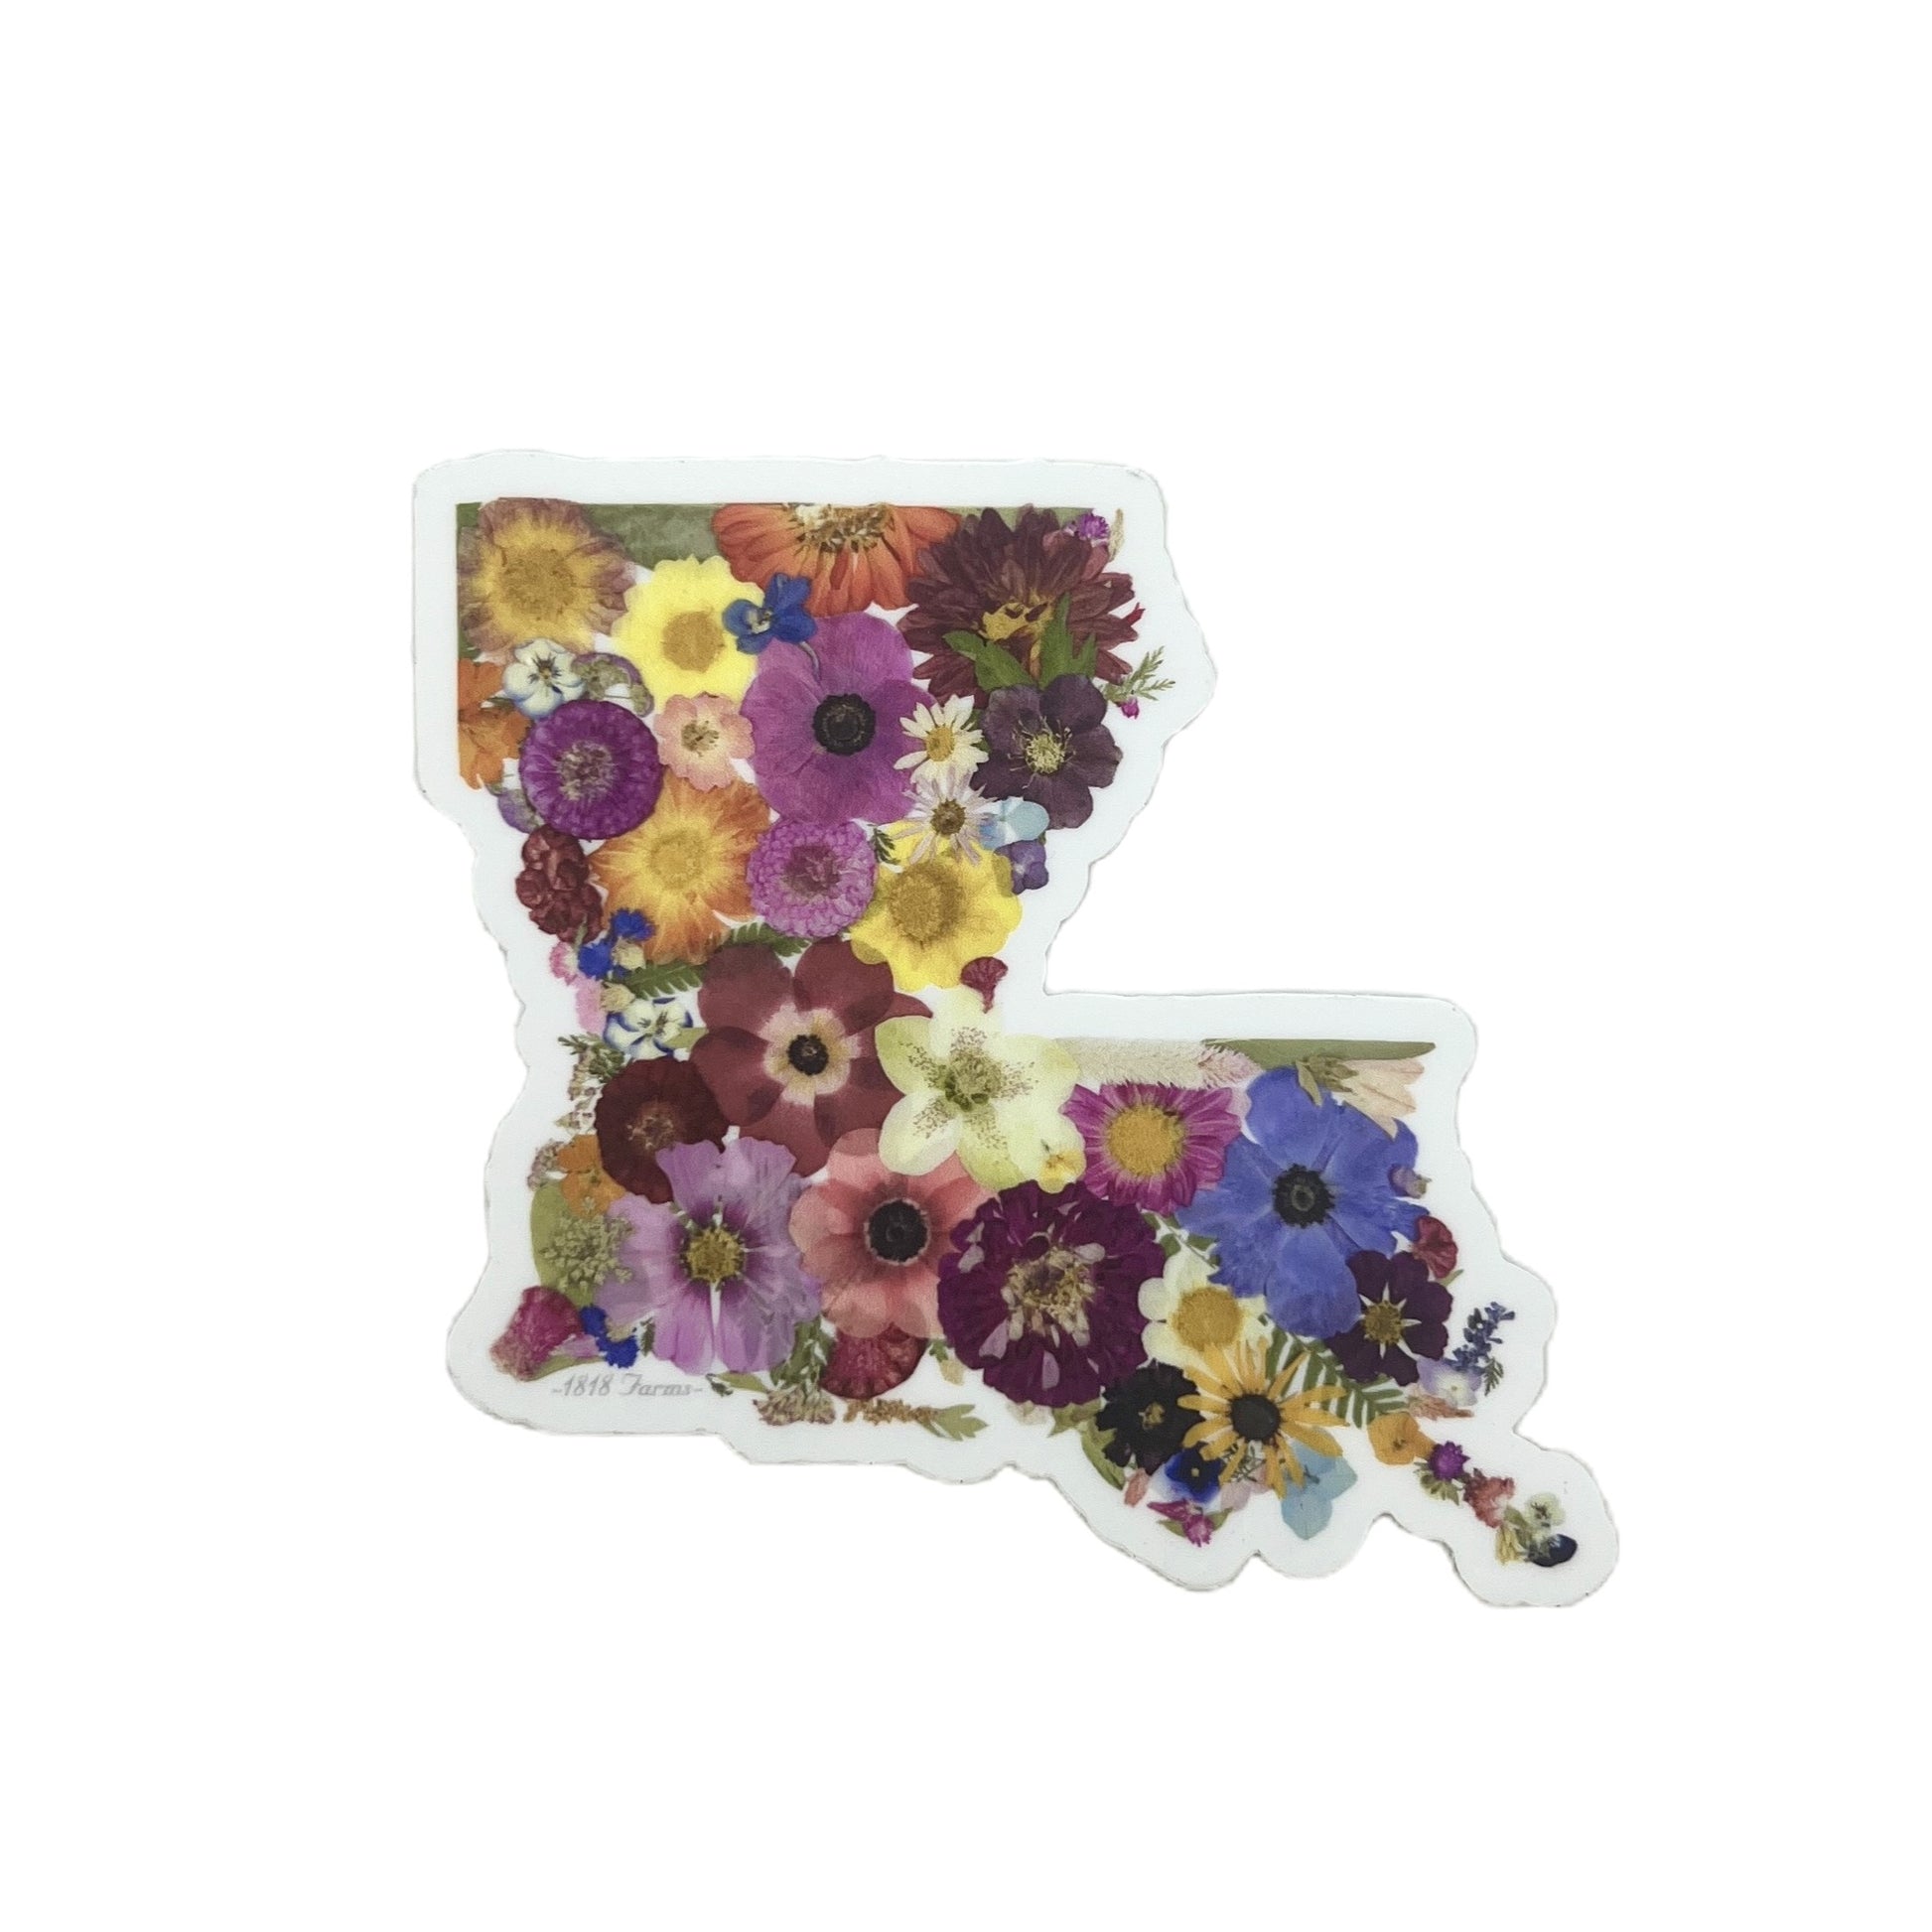 State Themed Vinyl Sticker Featuring Dried, Pressed Flowers - "Where I Bloom" Collection Vinyl Sticker 1818 Farms Louisiana  